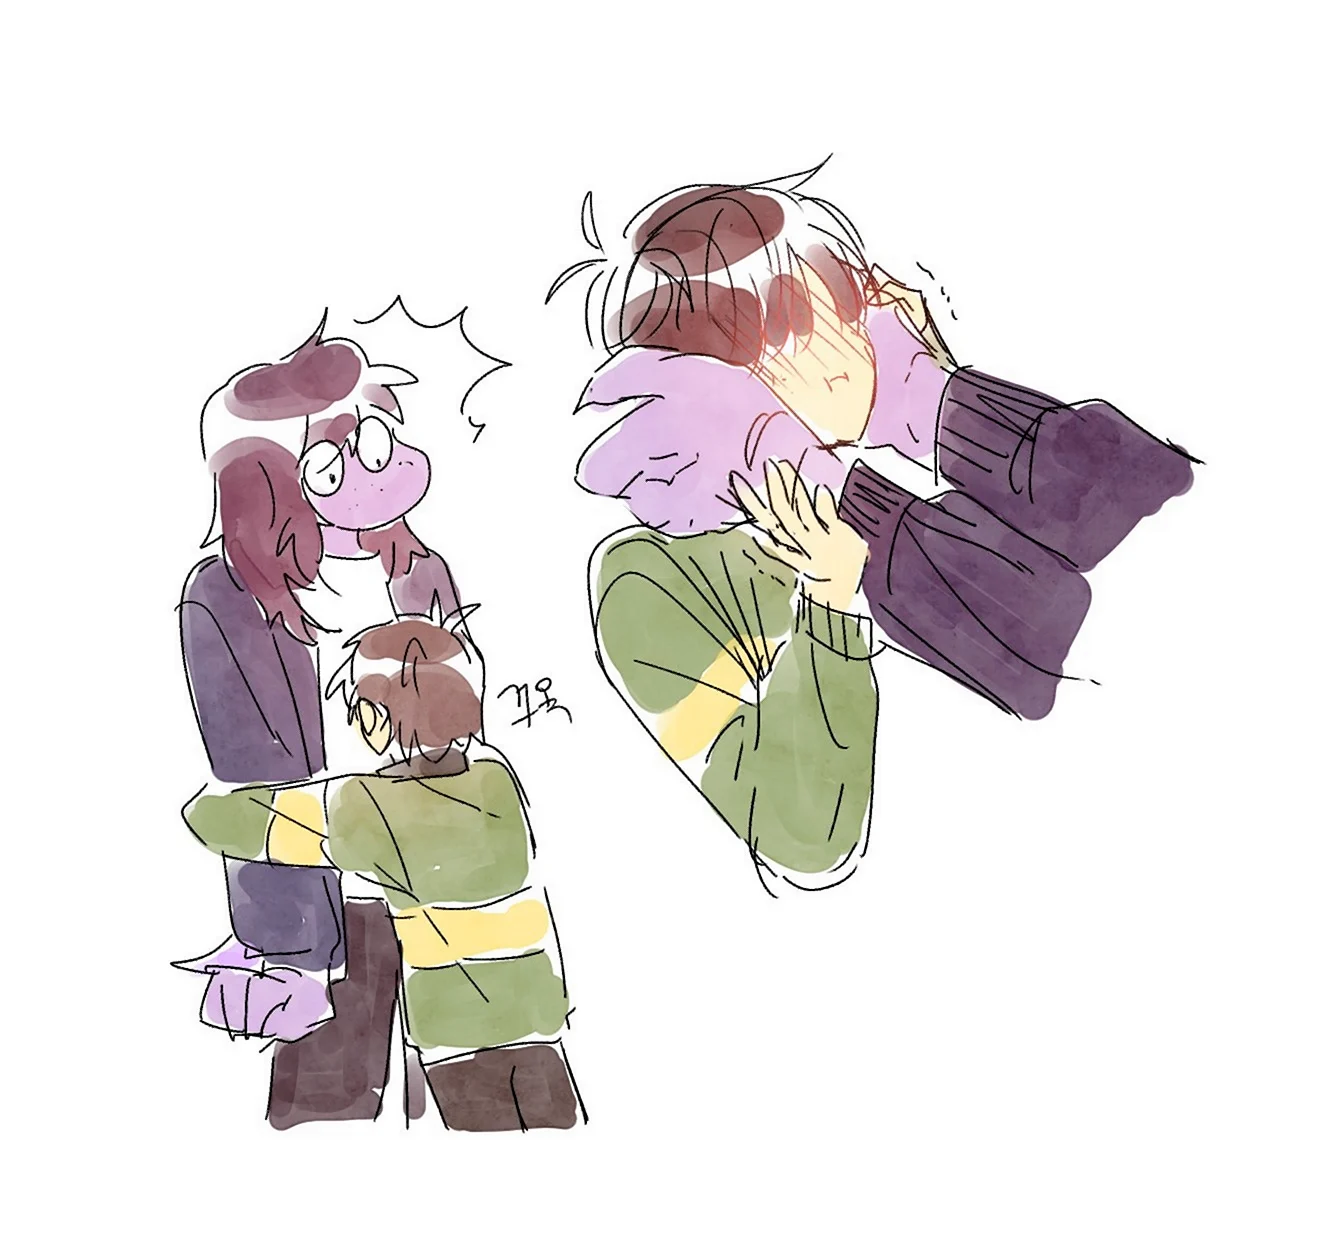 Kris and Susie